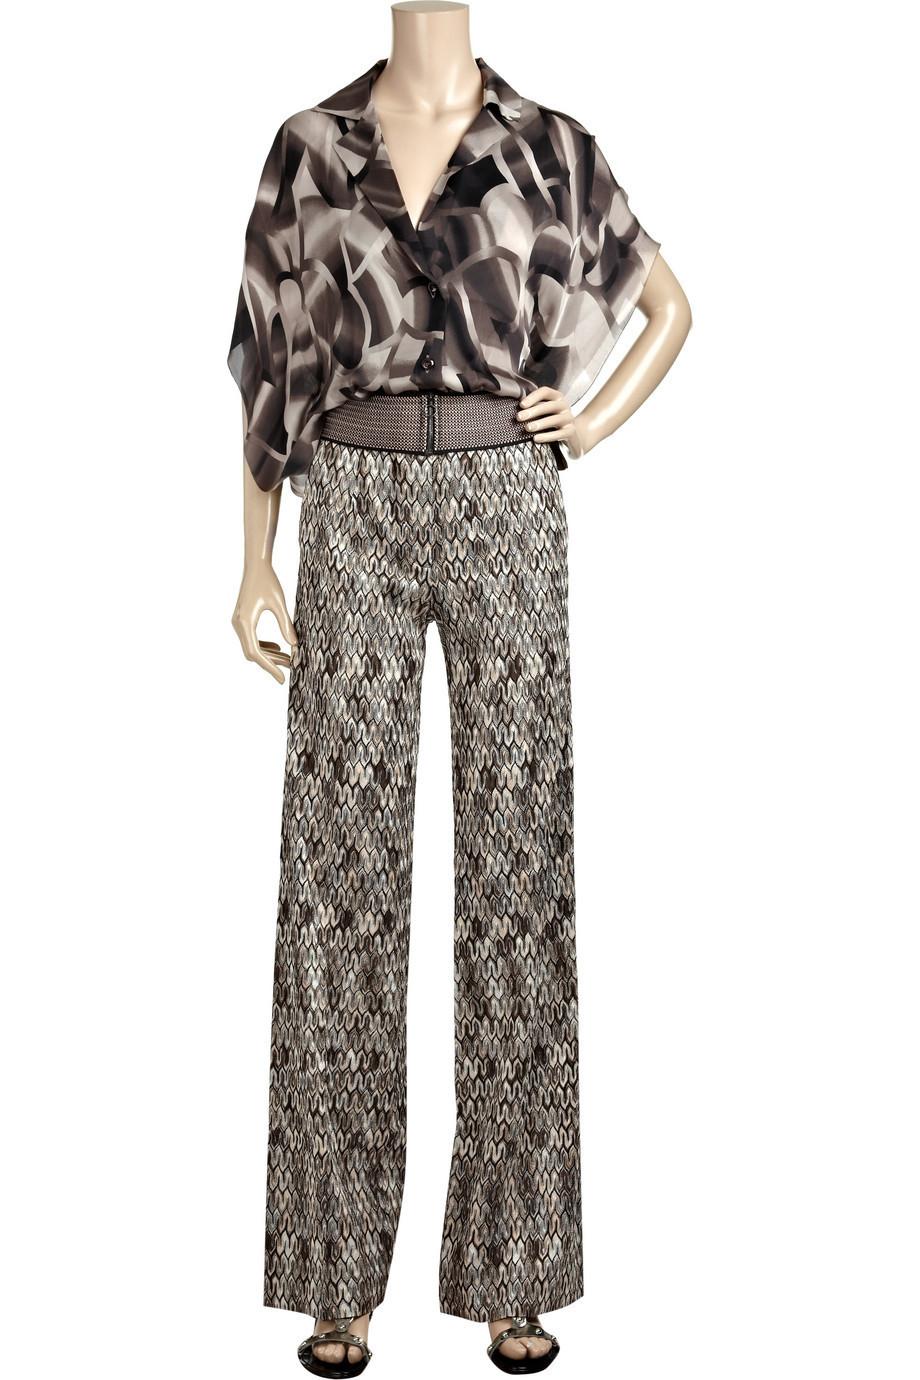 Designed by Missoni in its signature weave pattern, this jumpsuit is too stylish to resist! 
It comes with a silk top with buttoned front.

Details:

    Classic MISSONI signature zigzag crochet knit
    Stunning colors!
Silk top. discreetly printed